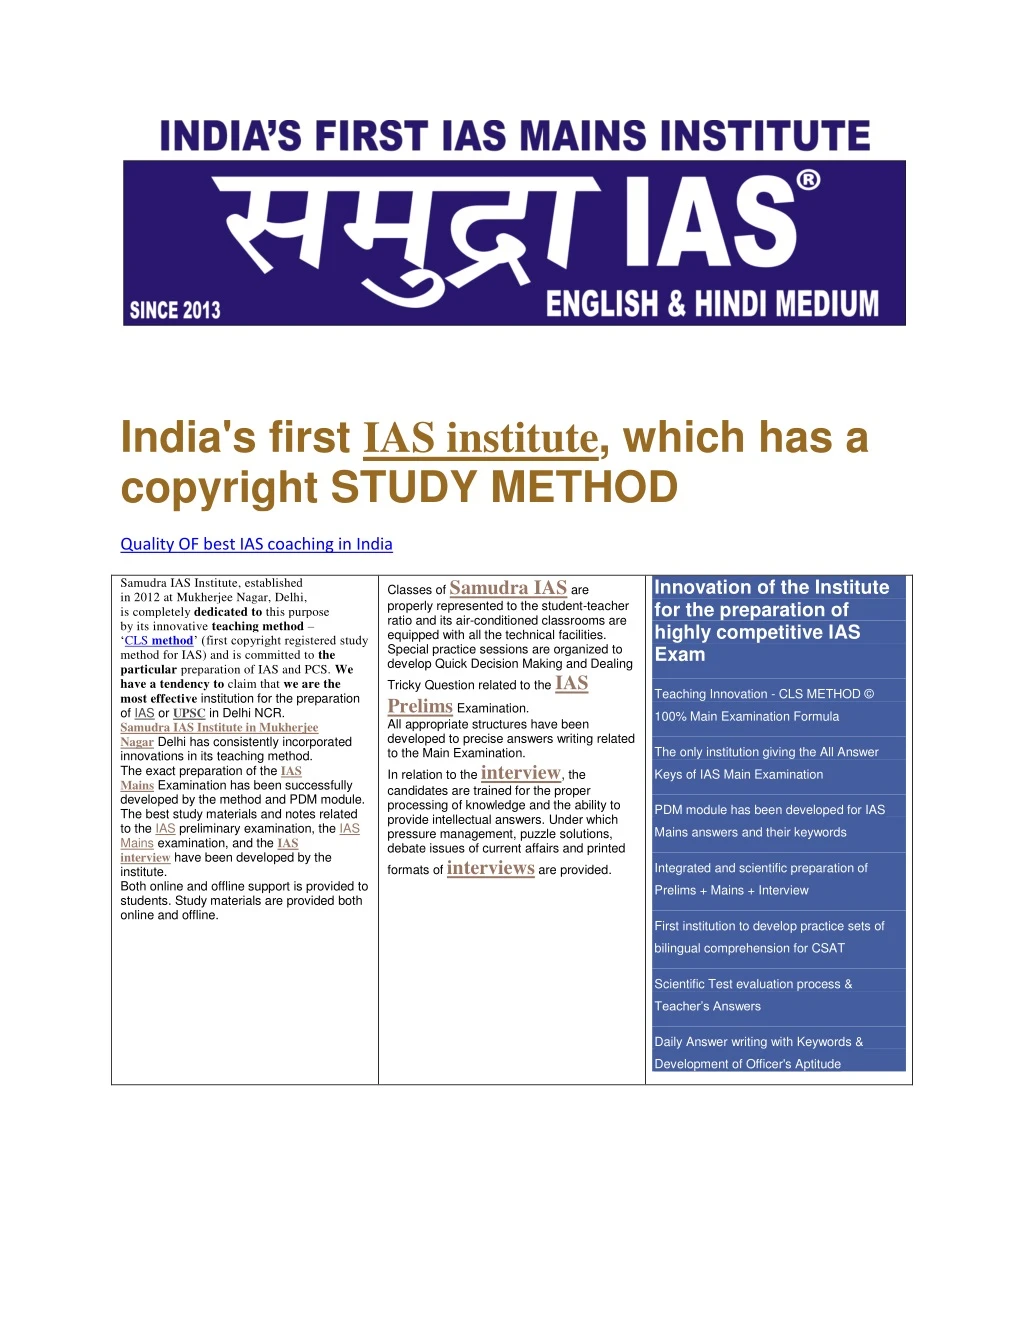 india s first ias institute which has a copyright